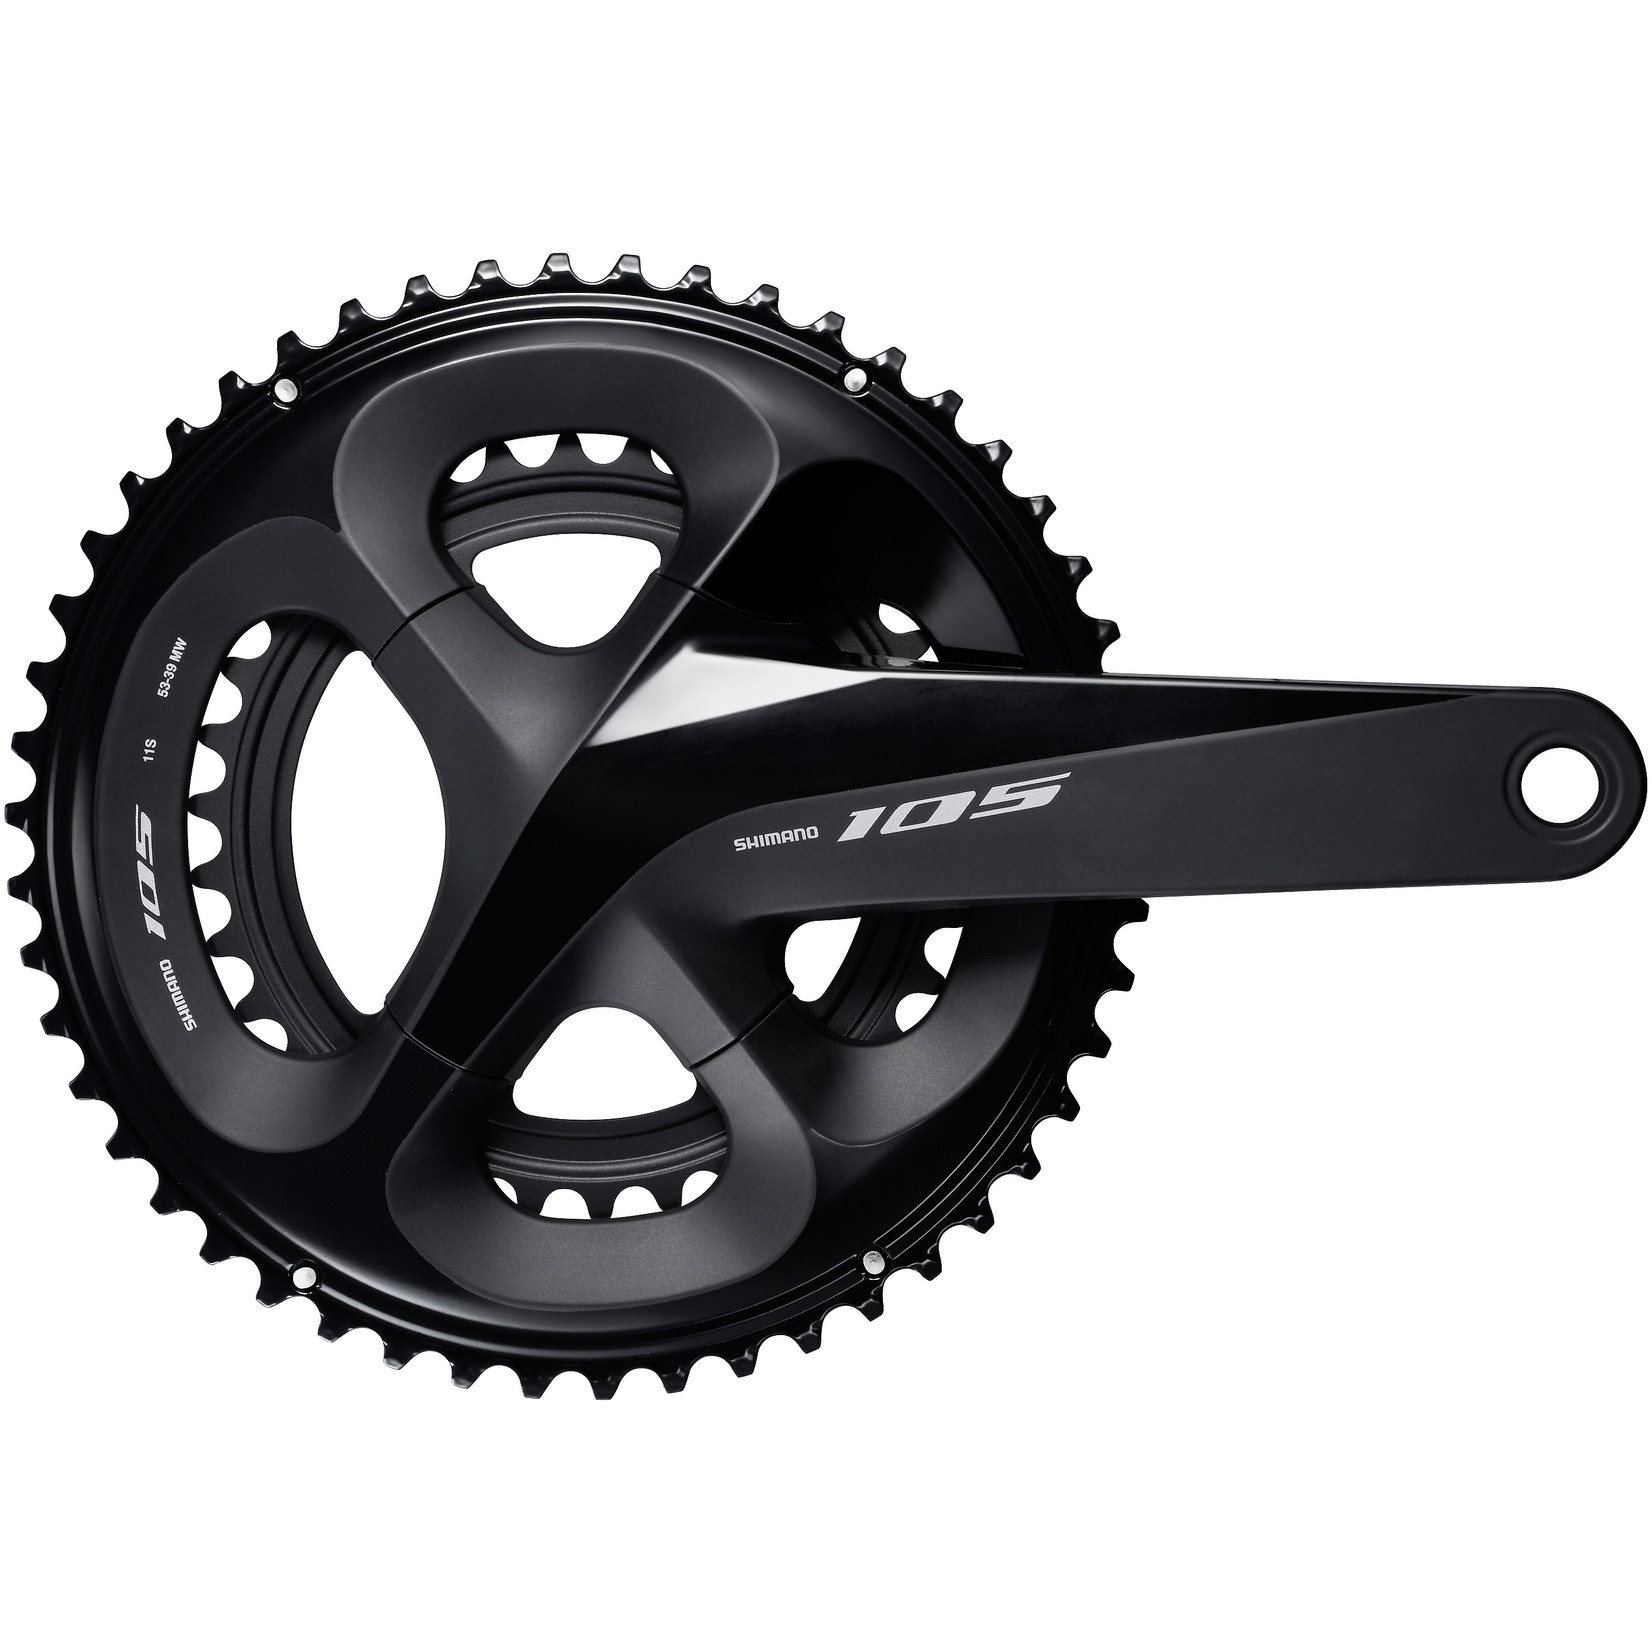 Shimano FC-R7000 105 Double Chainset HollowTech II 172.5MM 50/34T Black